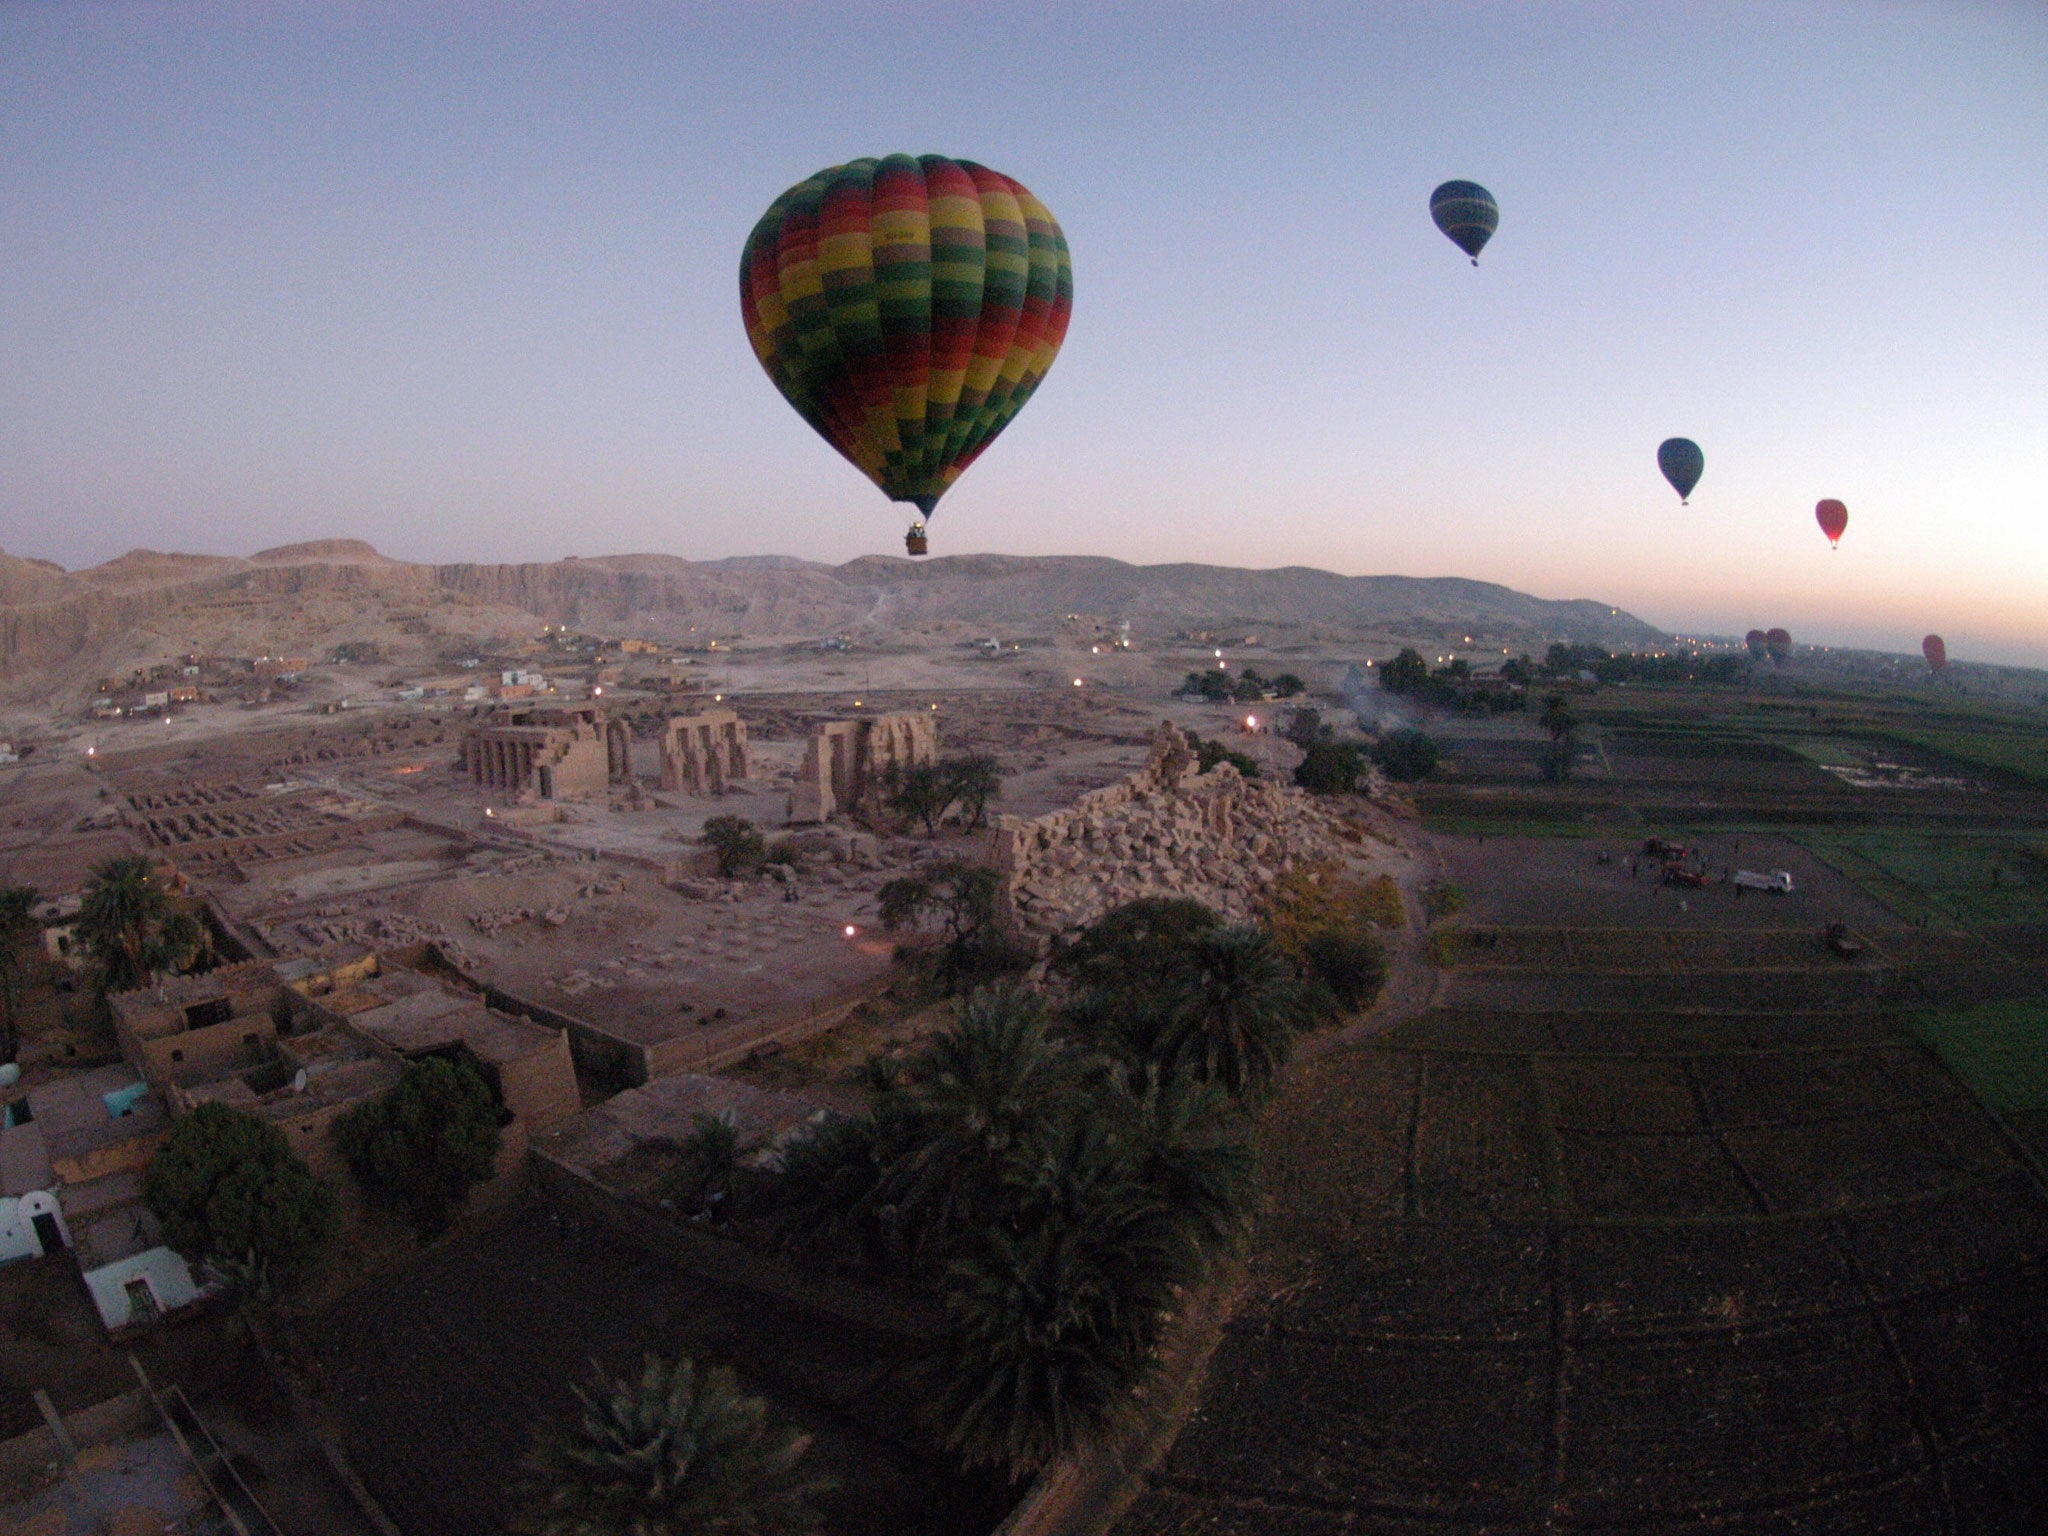 Tourist hot air balloons float during dawn across Egypt's Valley of the Kings, near Luxor on November 15, 2007. 19 people were killed when their hot air balloons crashed around the Nile resort town of Luxor on February 26th 2013.